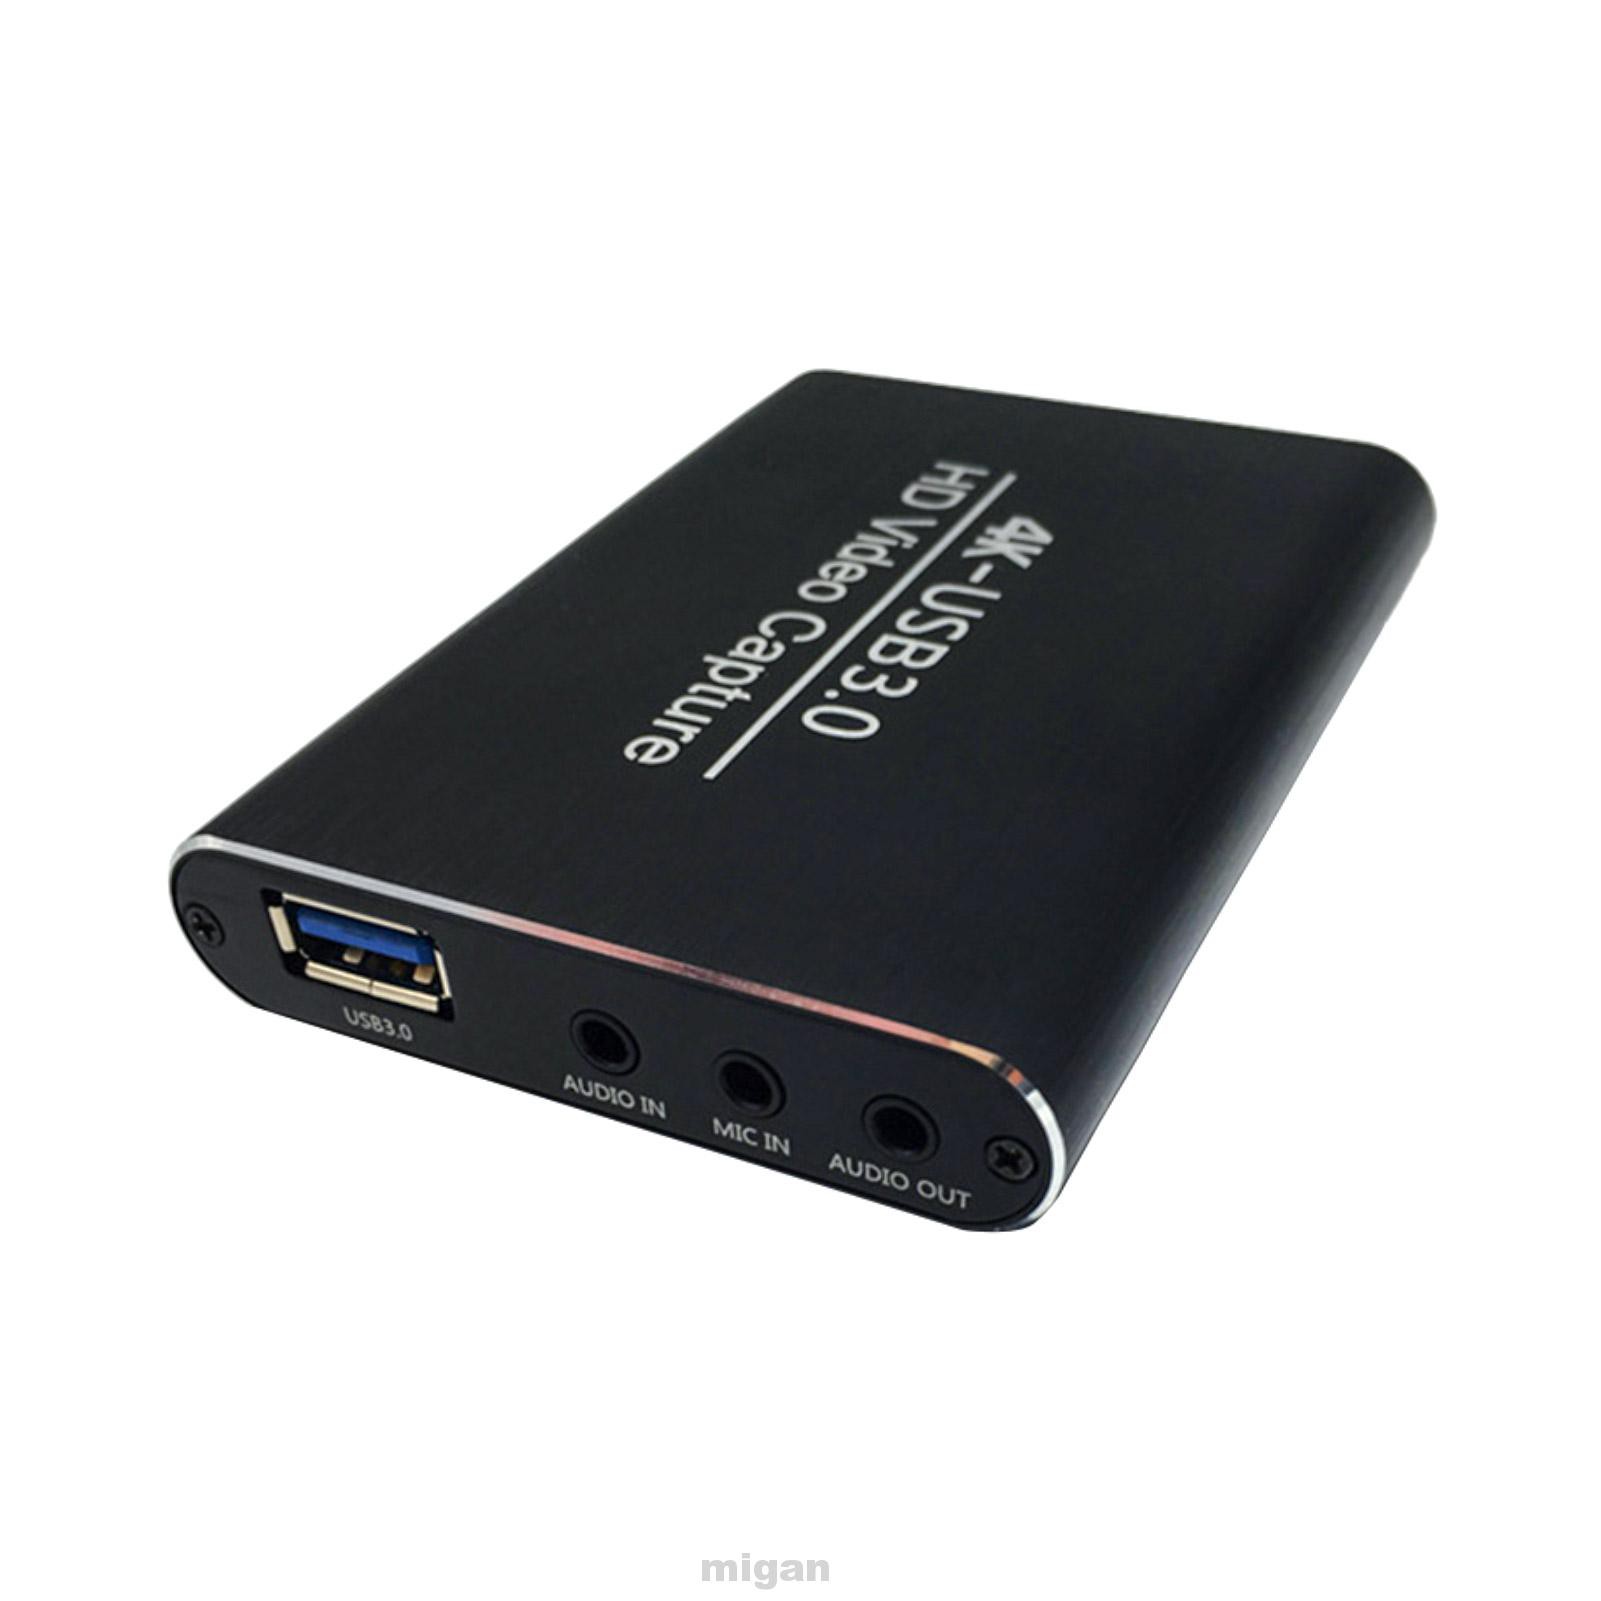 HDMI USB3.0 Aluminum Alloy Universal Portable HD 1080P Broadcasting Live Streaming Game Recording Video Capture Card